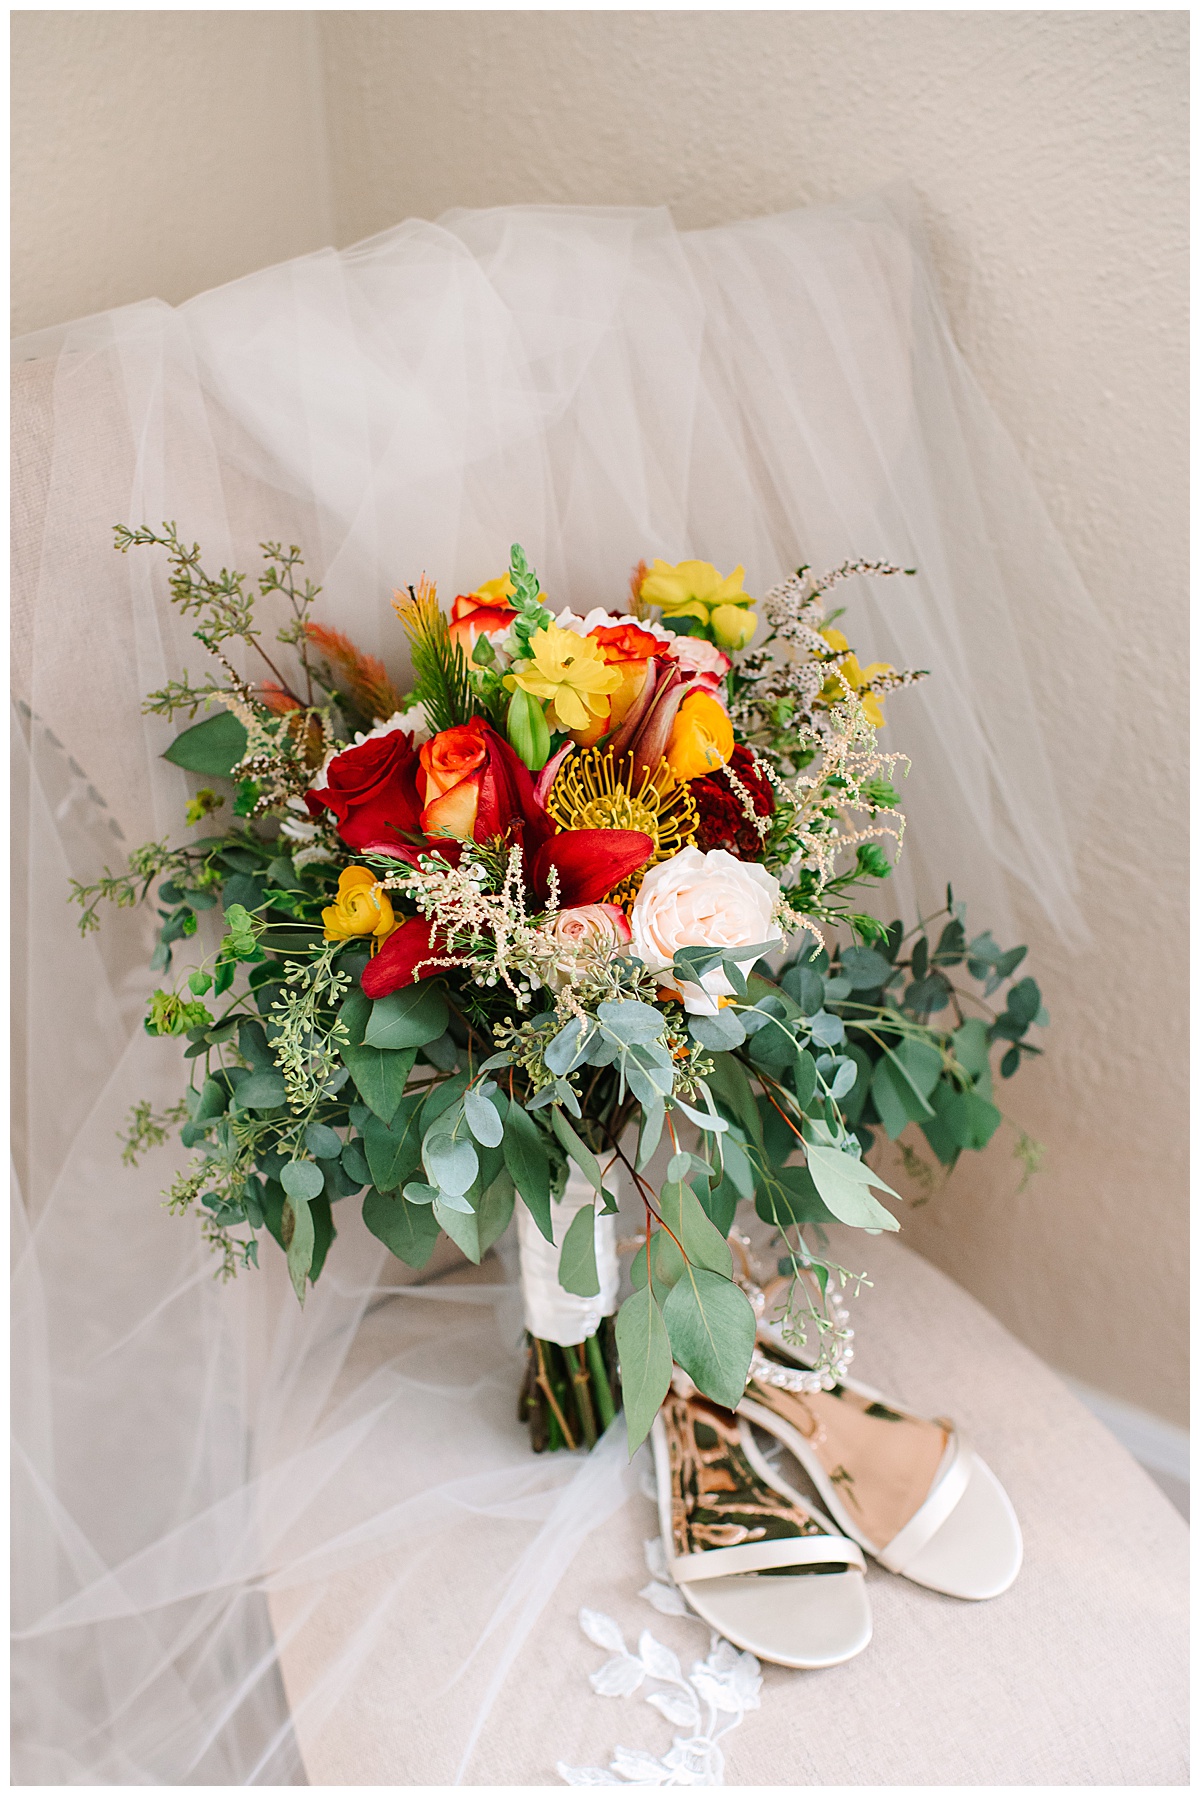 Beautiful bridal bouquet and shoes by Brittany Emerson Photography